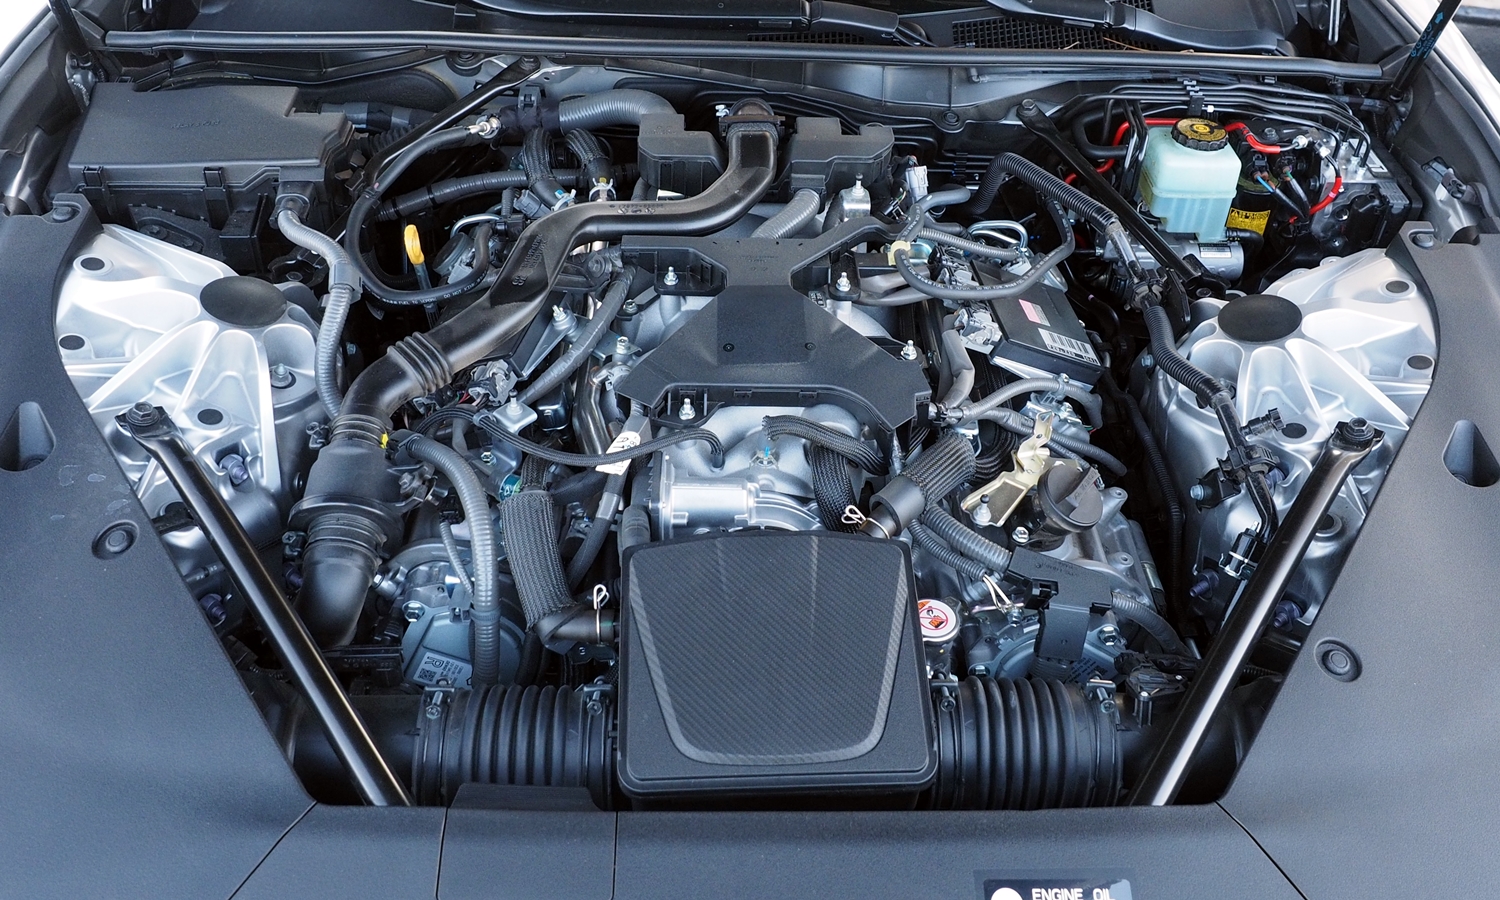 LC Reviews: Lexus LC 500 engine uncovered